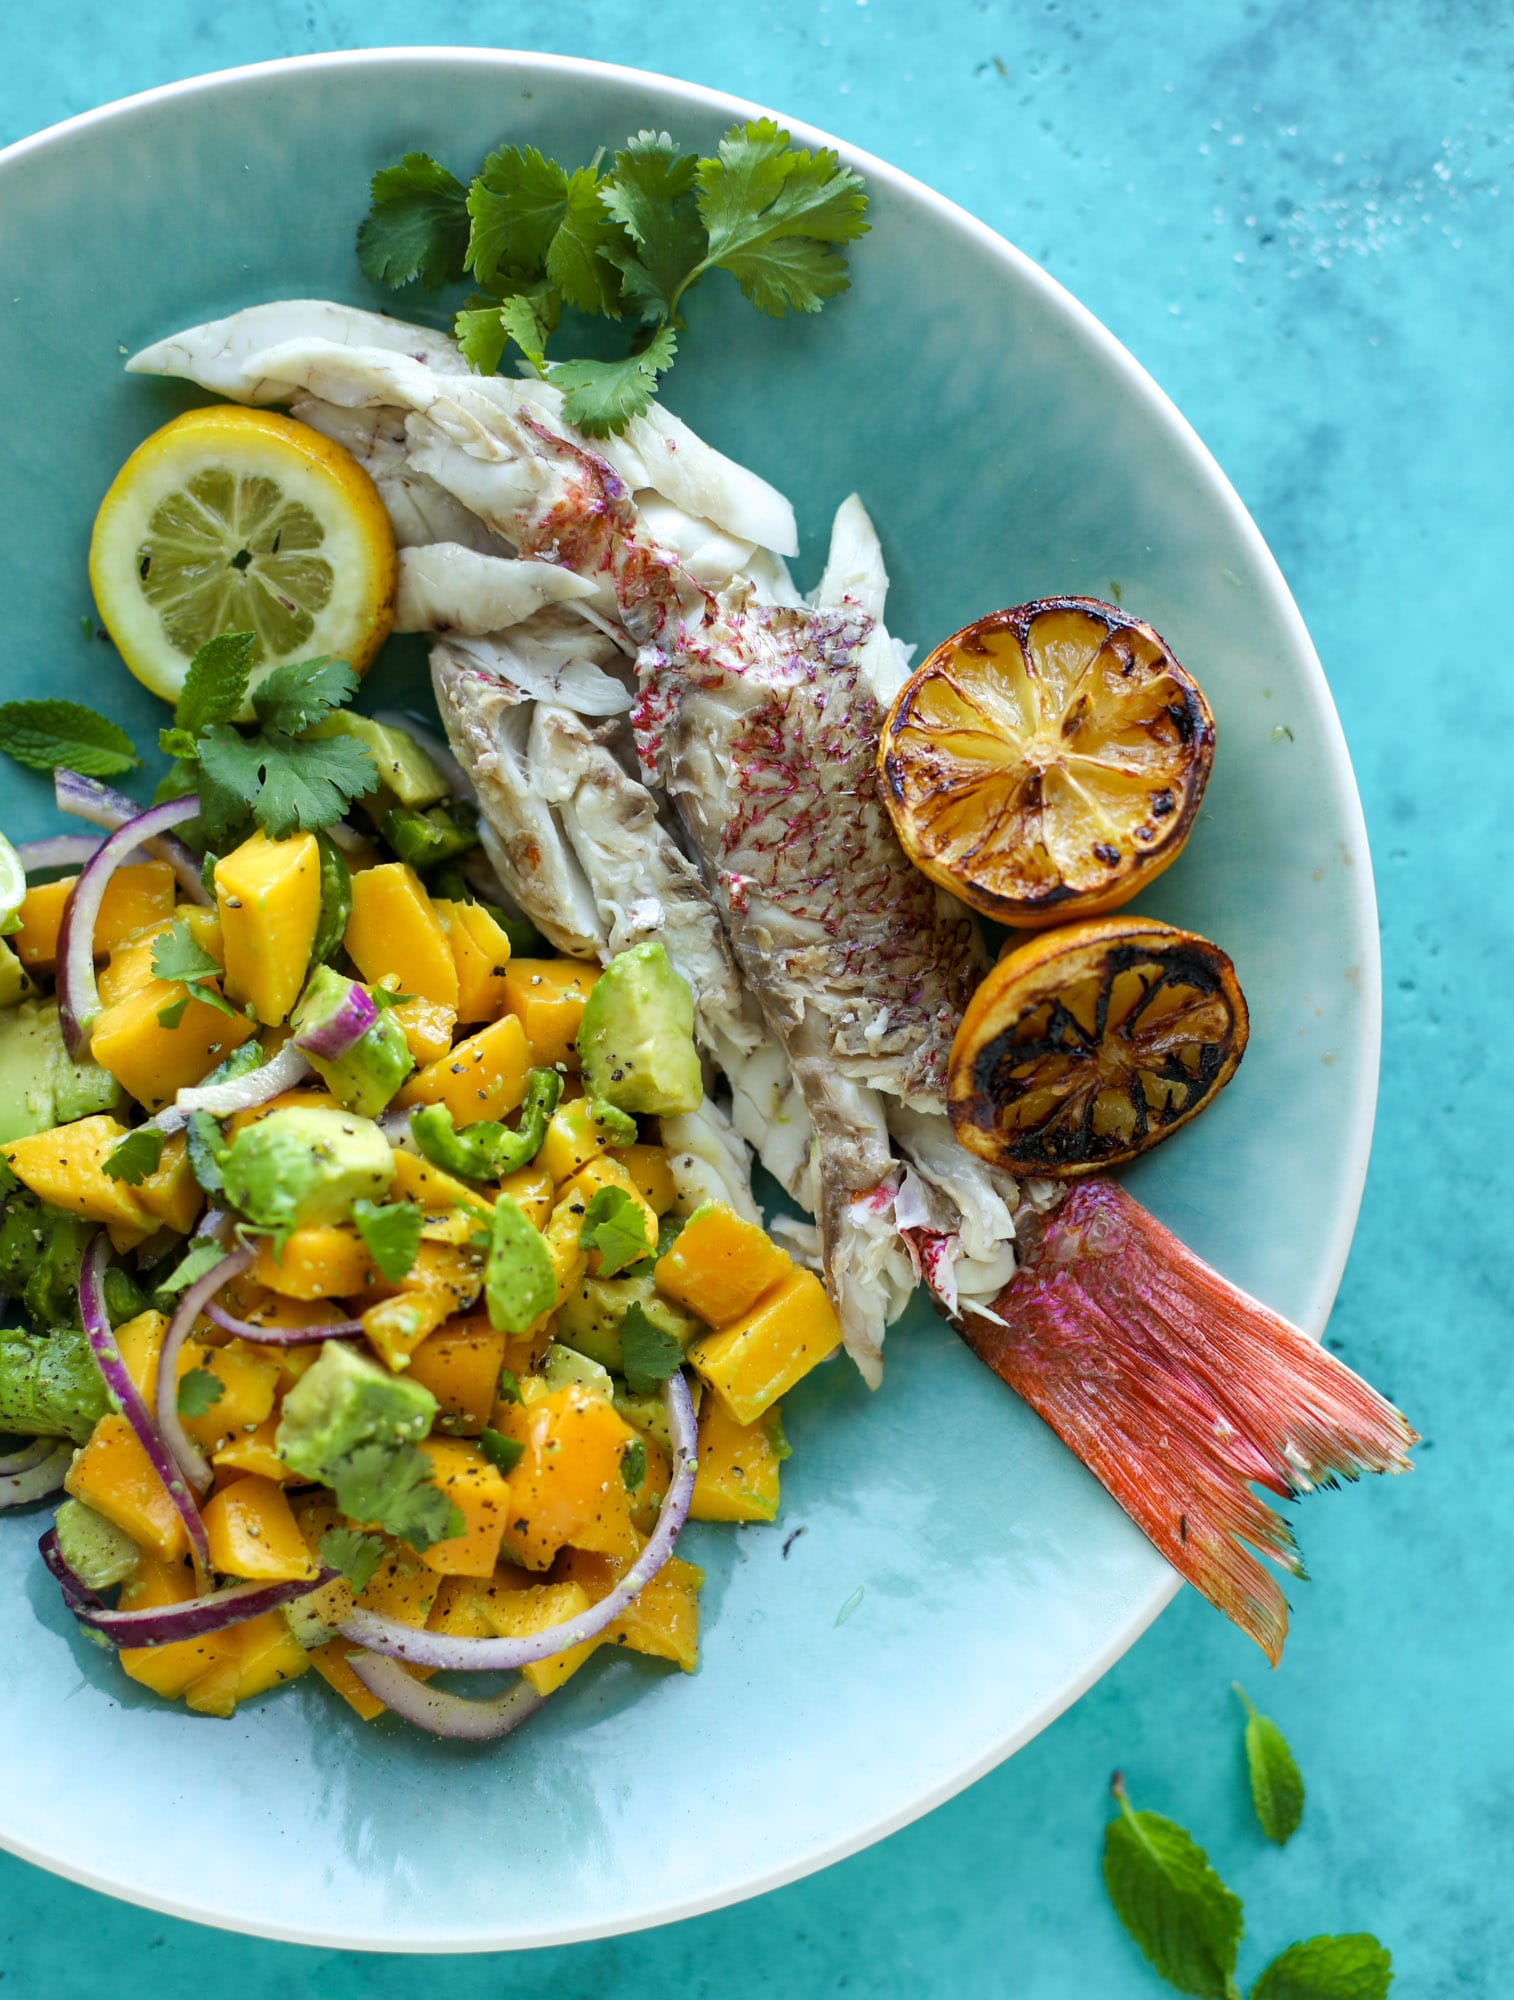 Grilled whole fish is easier than it looks! Try this recipe for the butteriest, most flavorful grilled snapper paired with an avocado mango salad.